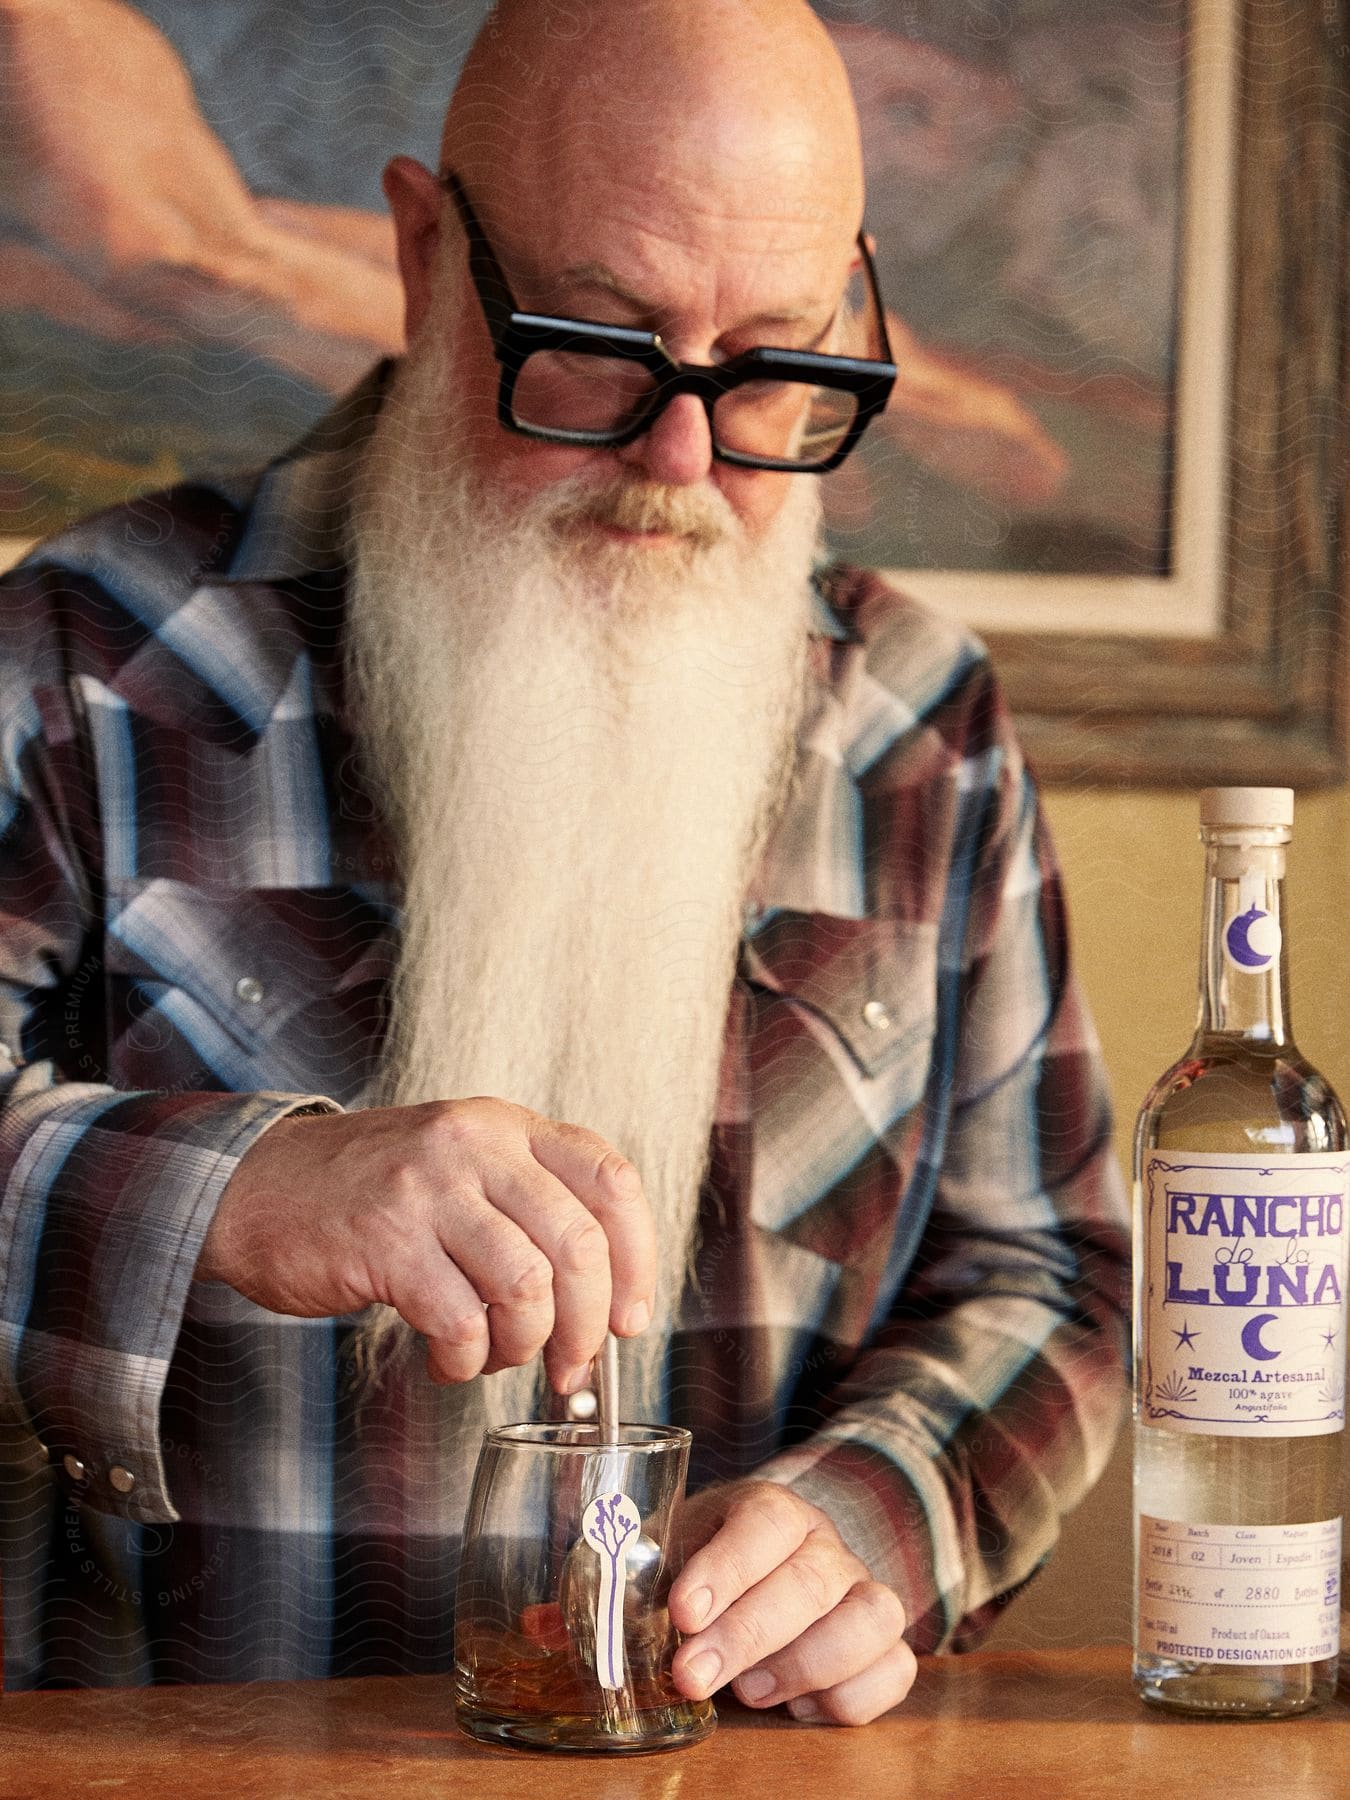 A bald man with glasses a flannel shirt and a long white beard prepares a drink on a glass with a bottle of mezcal next to him